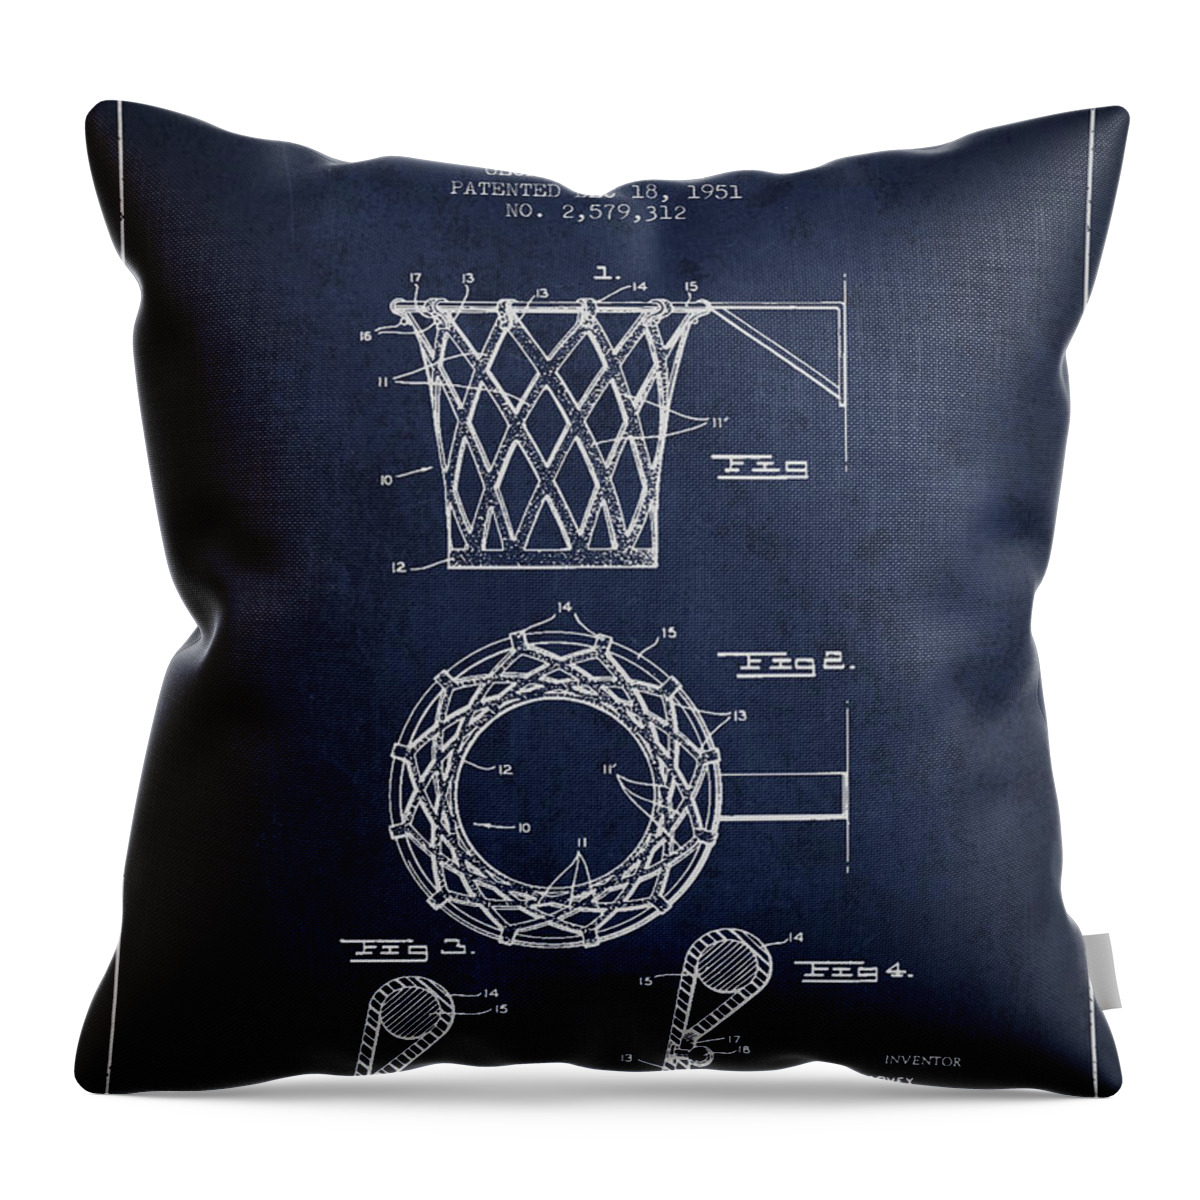 Hoop Patent Throw Pillow featuring the digital art Vintage Basketball Goal patent from 1951 by Aged Pixel